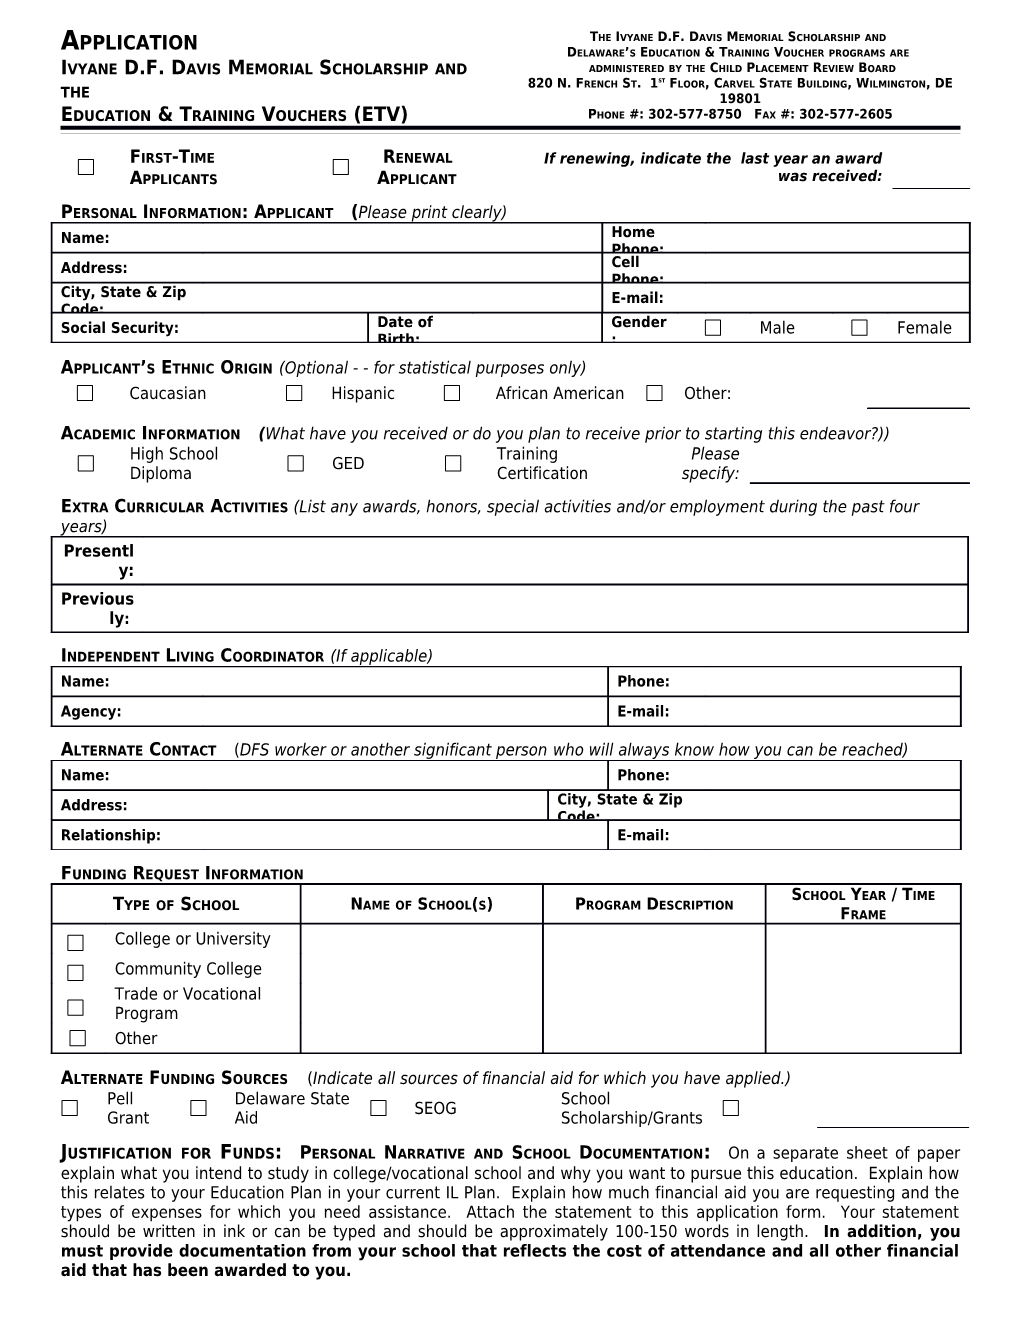 Personal Information: Applicant ( Please Print Clearly)